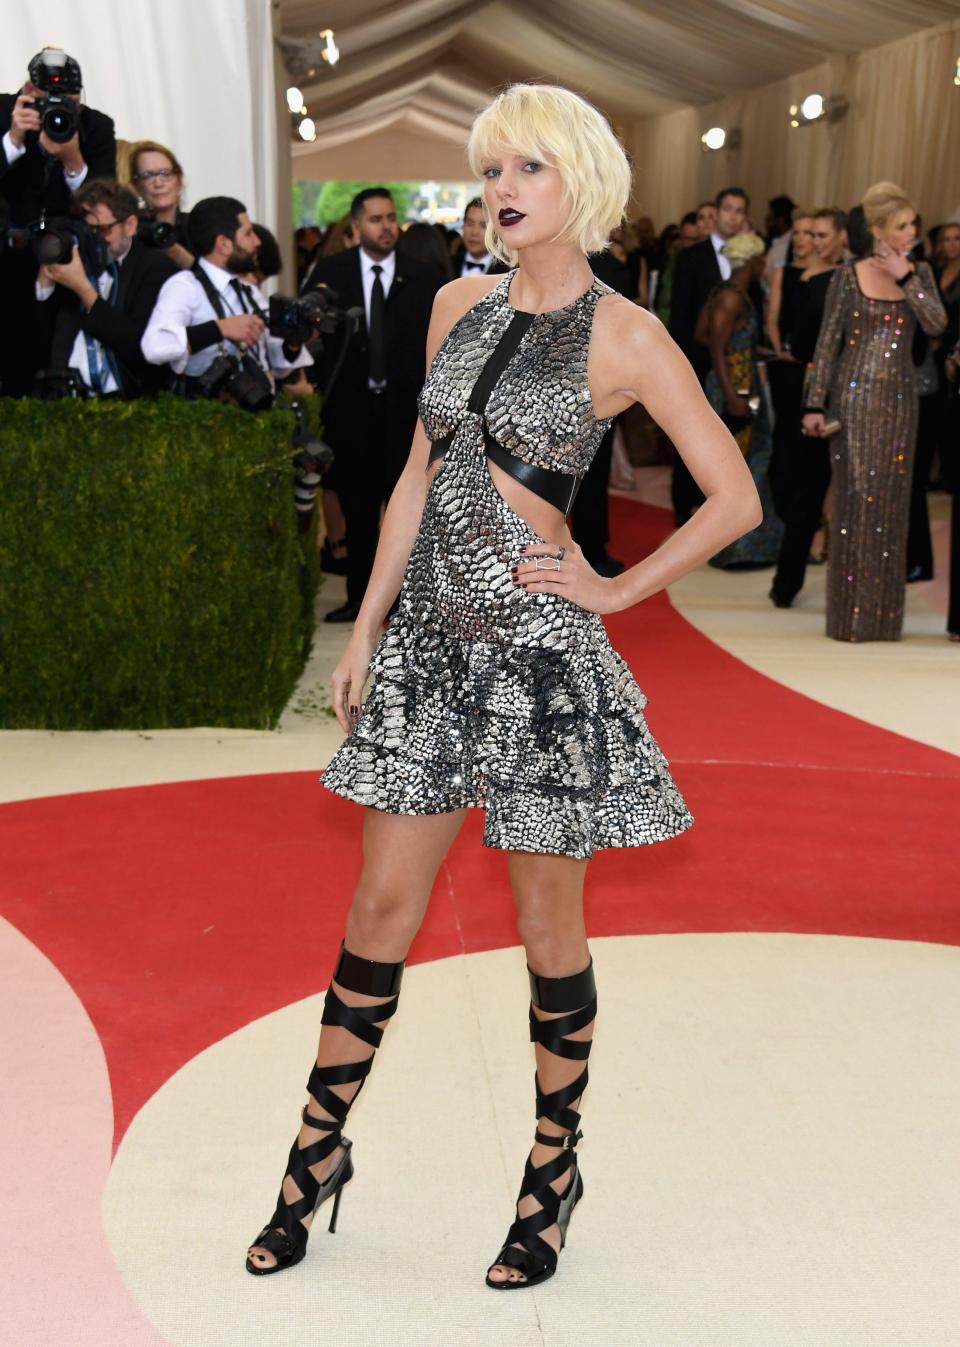 taylor swift wearing silver dress with platinum hair at the met gala in 2016